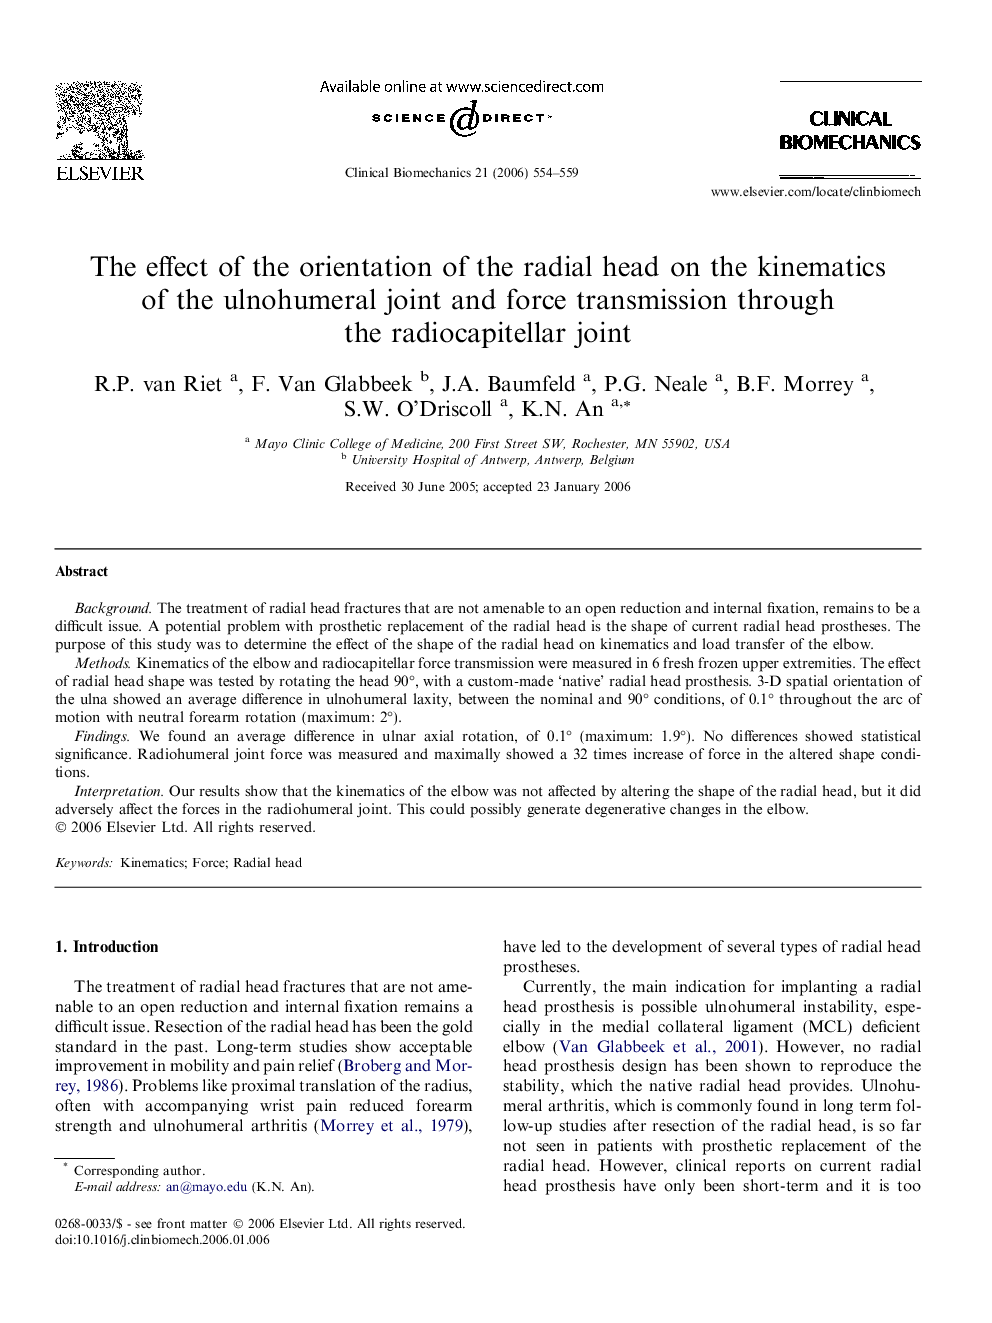 The effect of the orientation of the radial head on the kinematics of the ulnohumeral joint and force transmission through the radiocapitellar joint